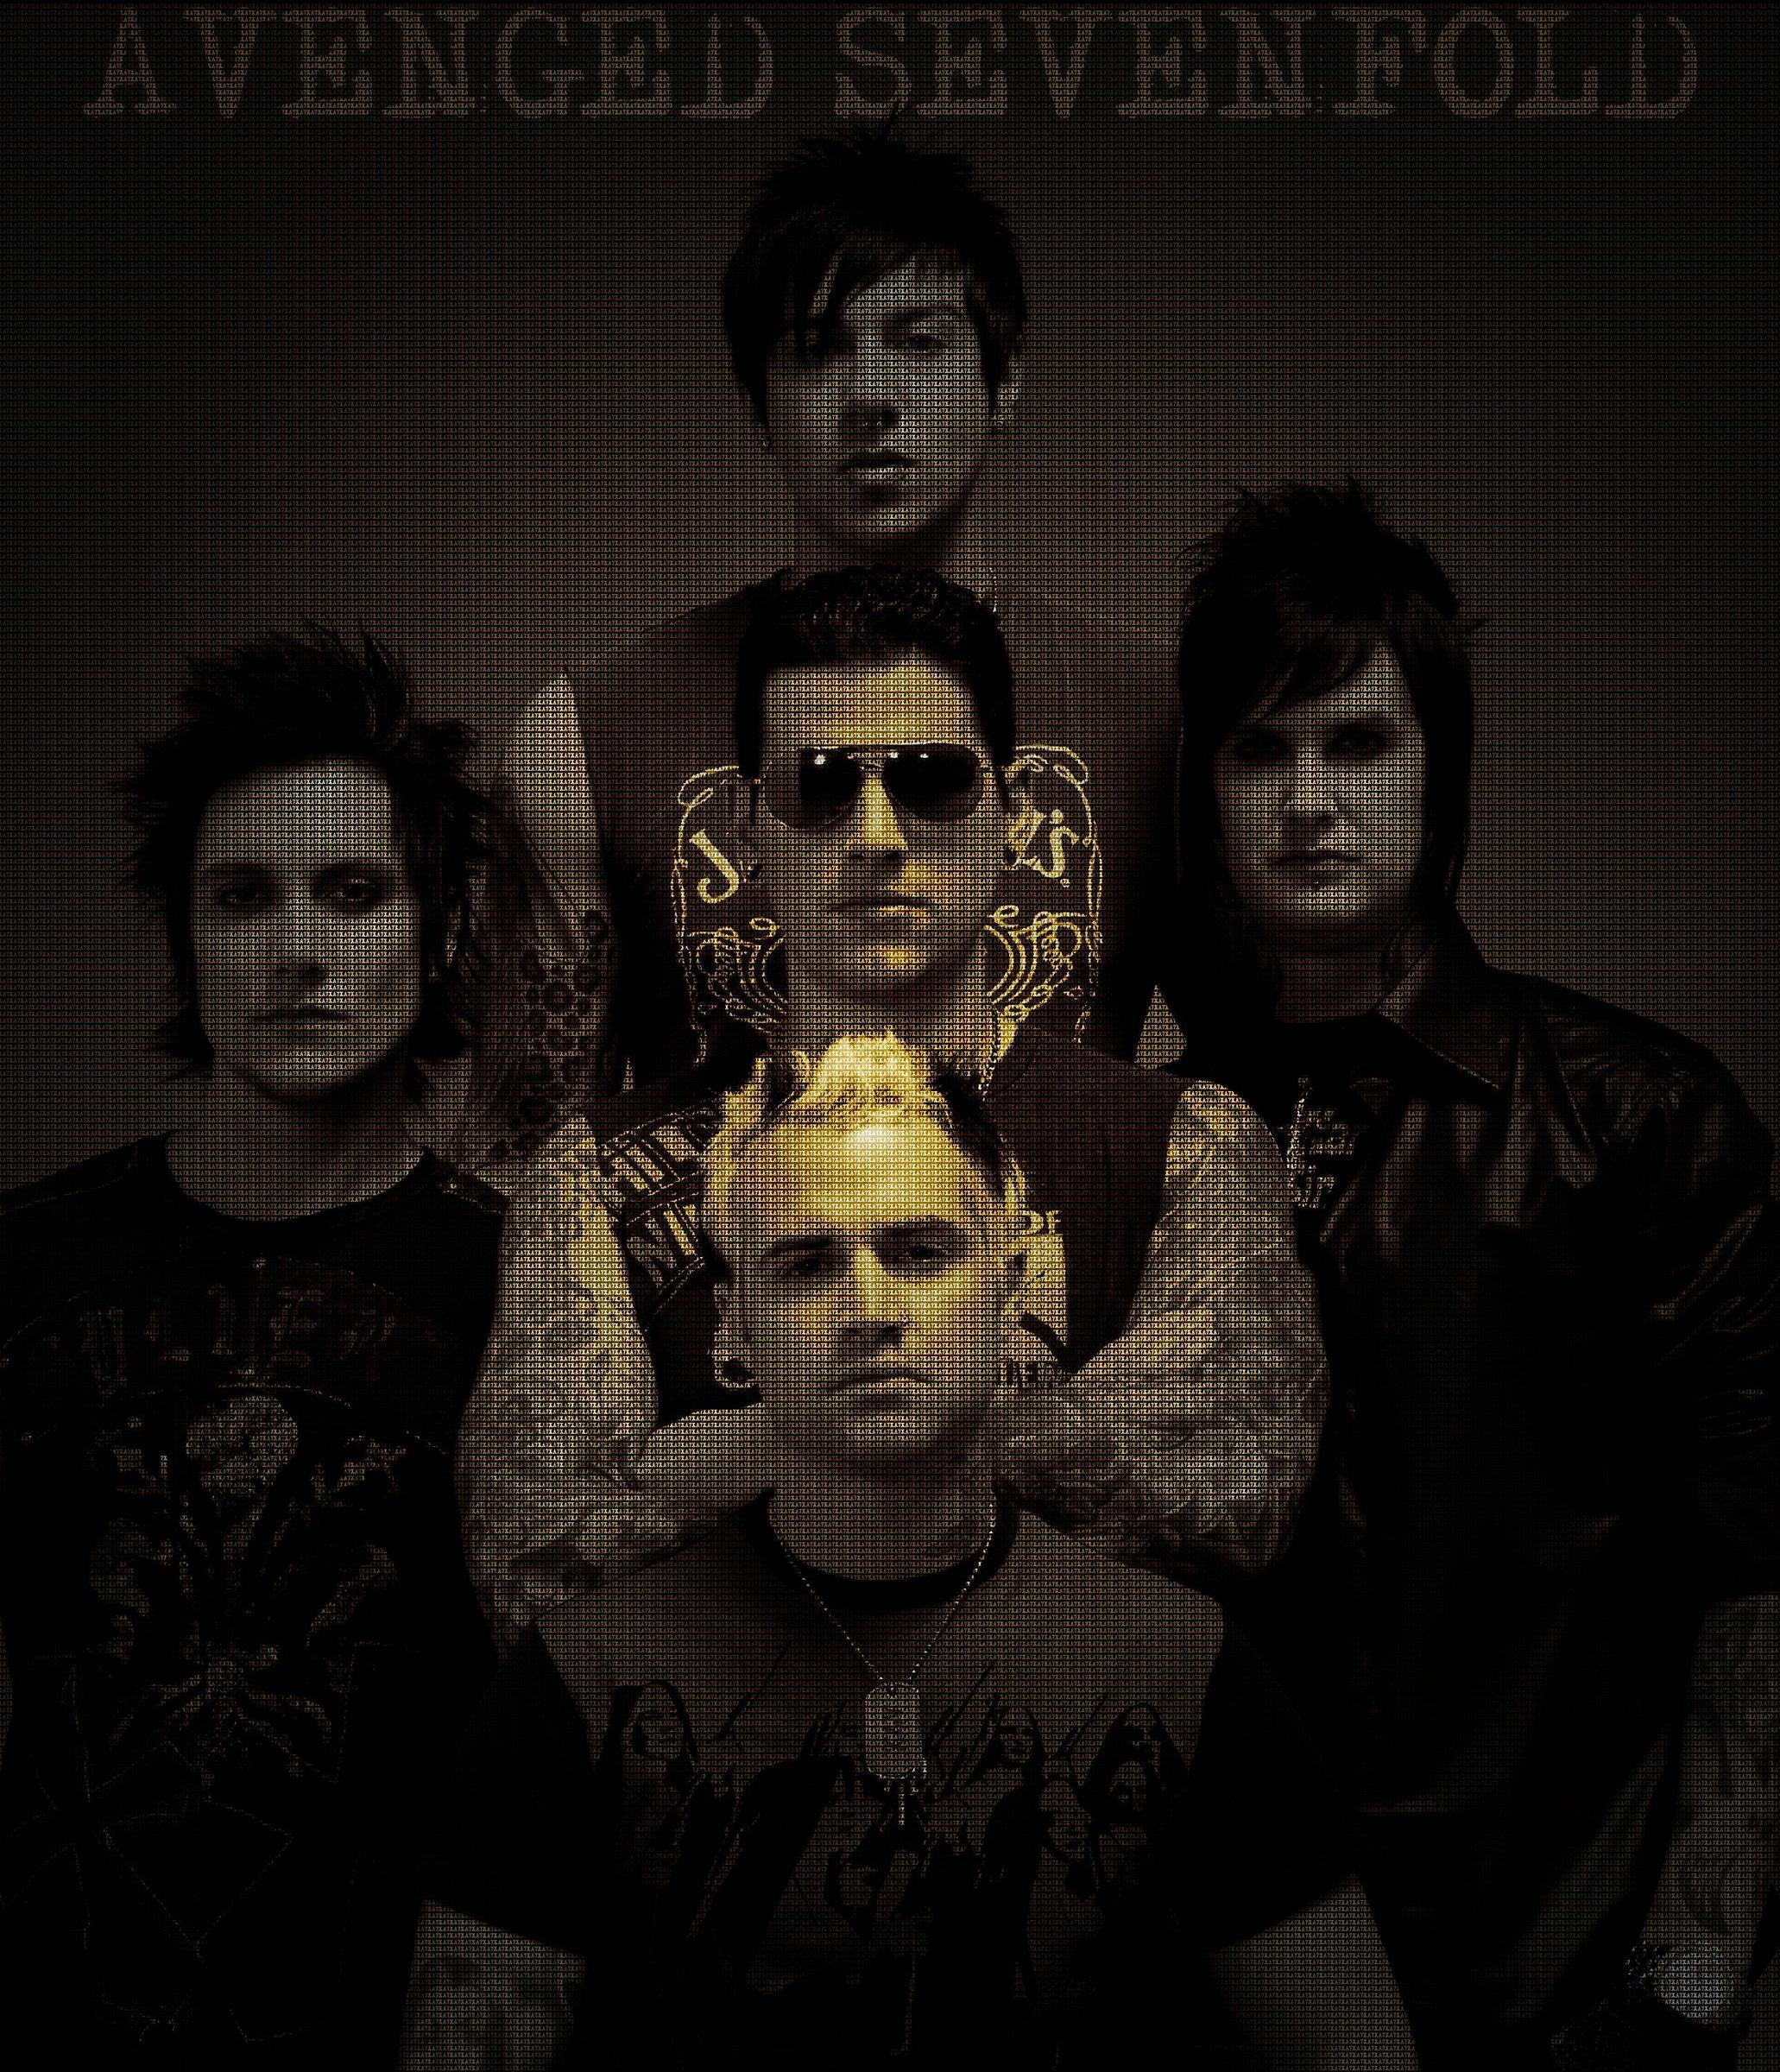 Download Avenged Sevenfold wallpapers for mobile phone free Avenged  Sevenfold HD pictures